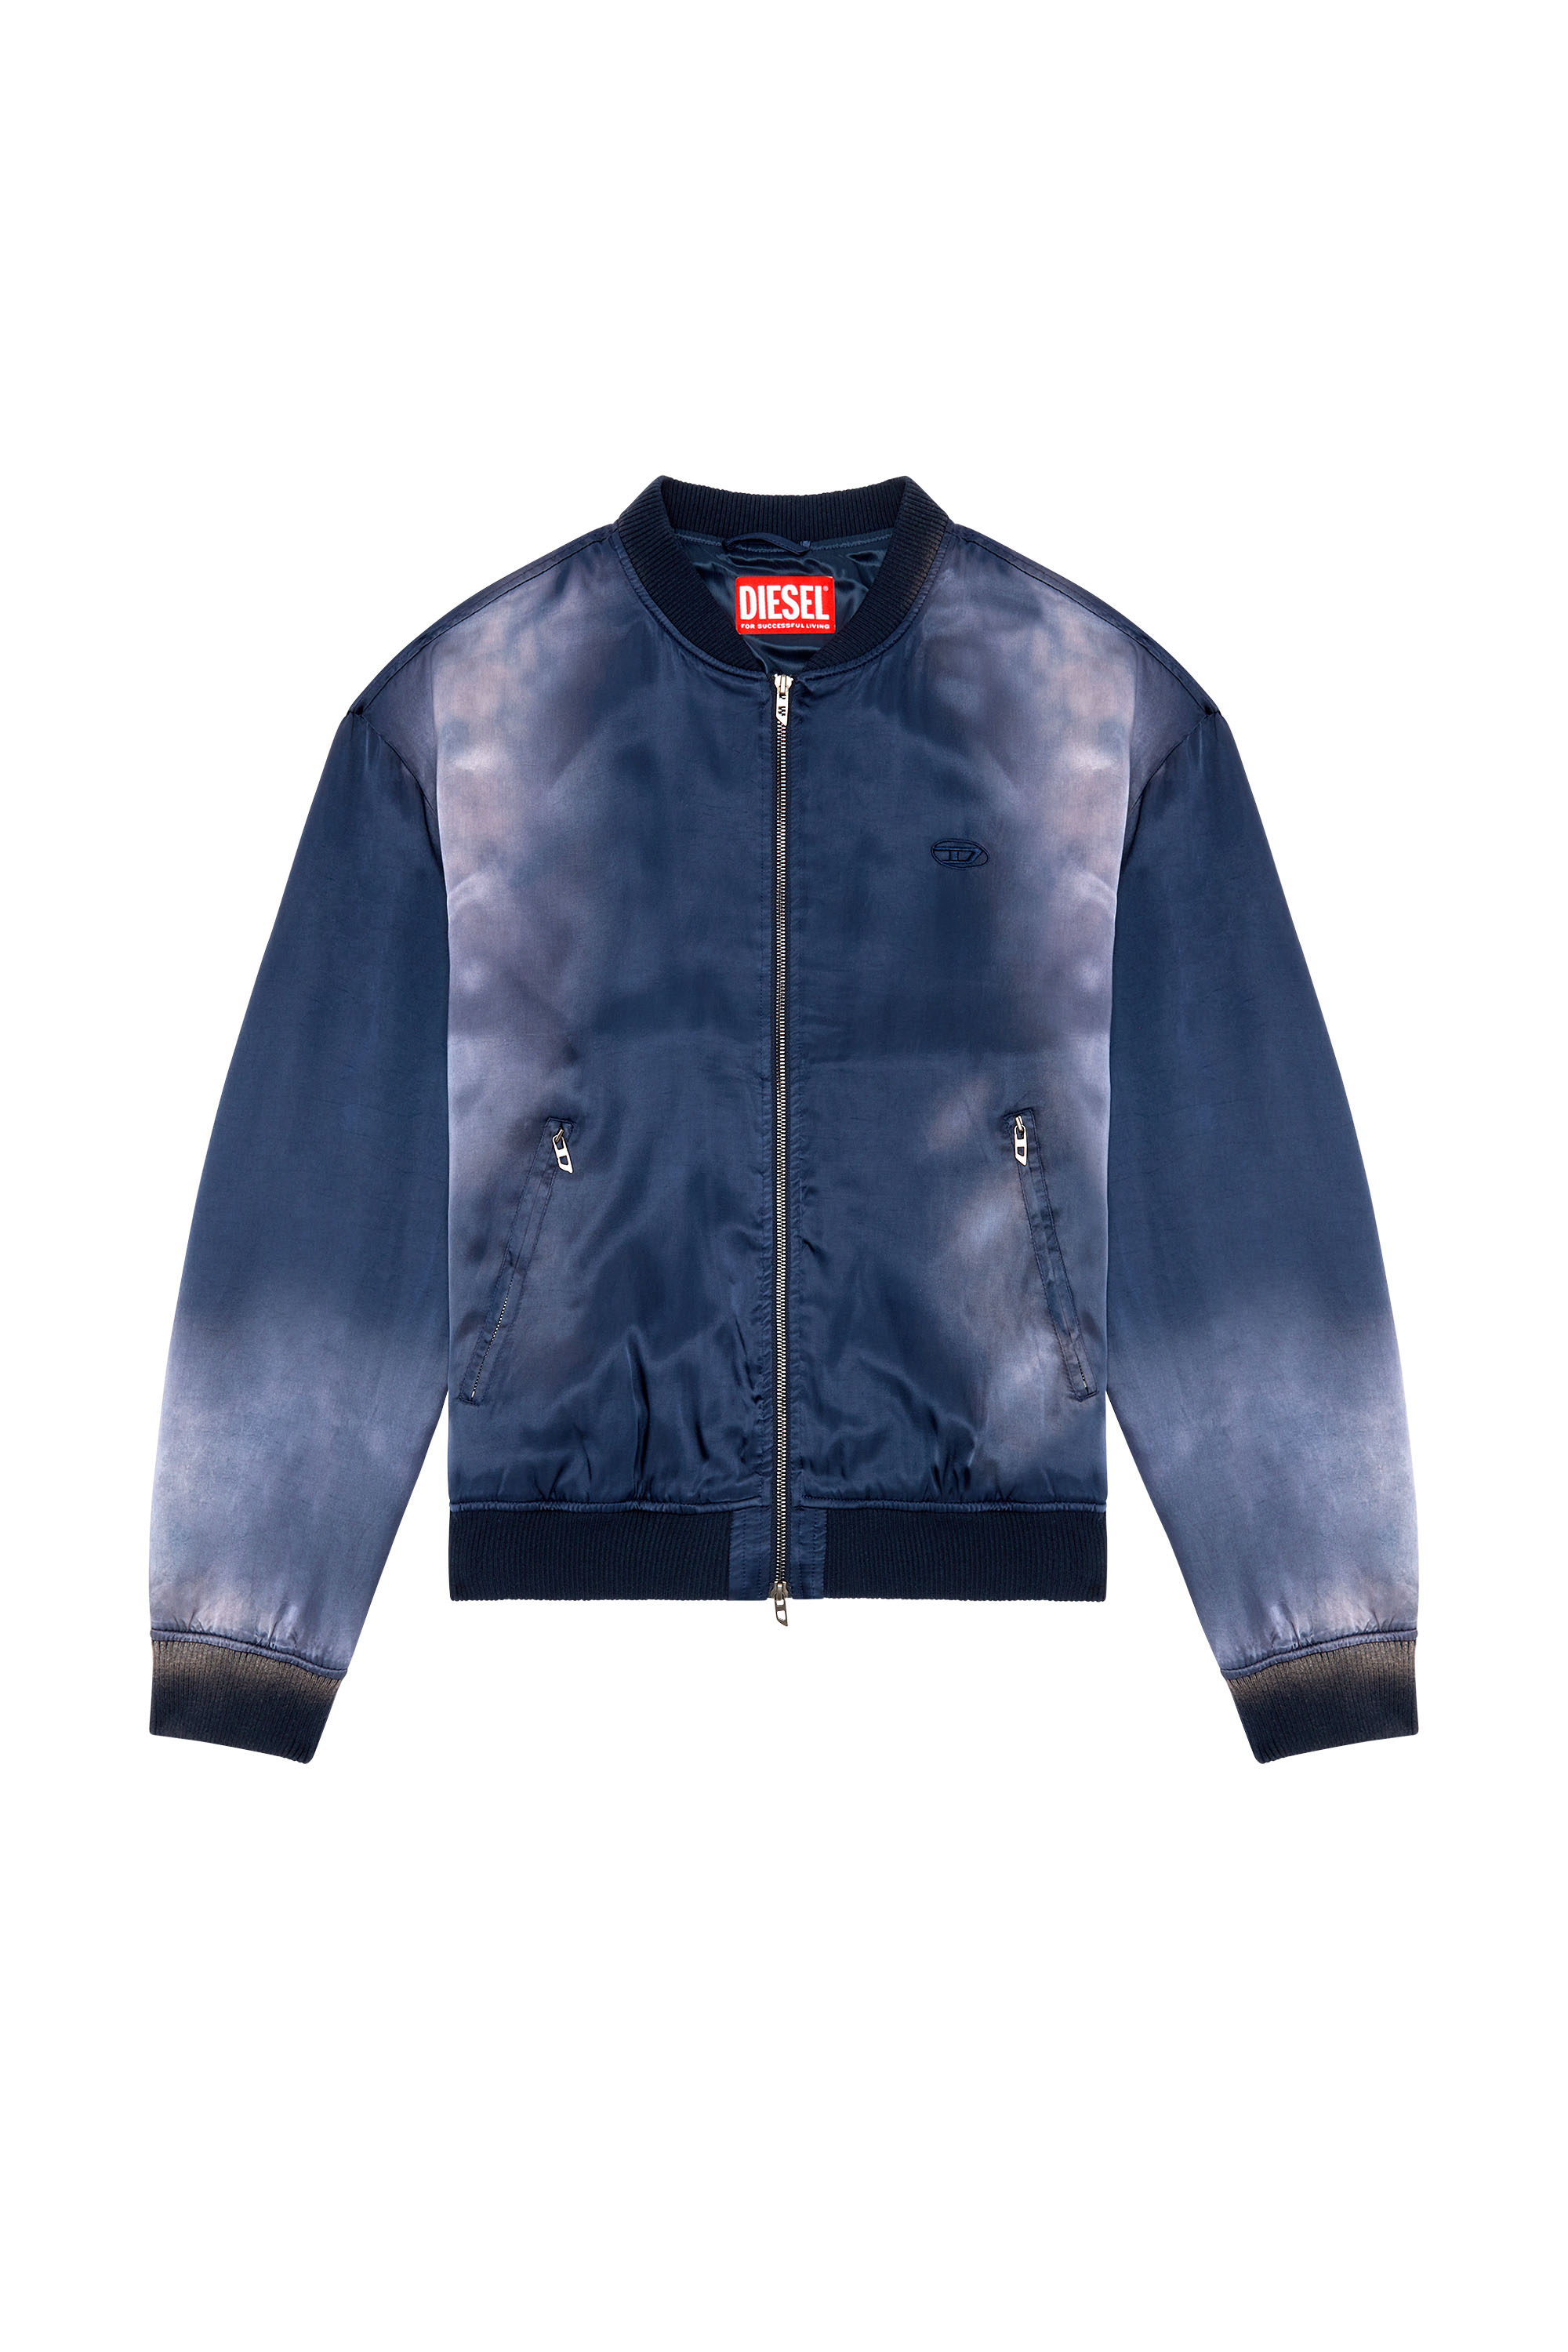 Diesel - J-MARTEX, Man Satin bomber jacket with faded effect in Blue - Image 3